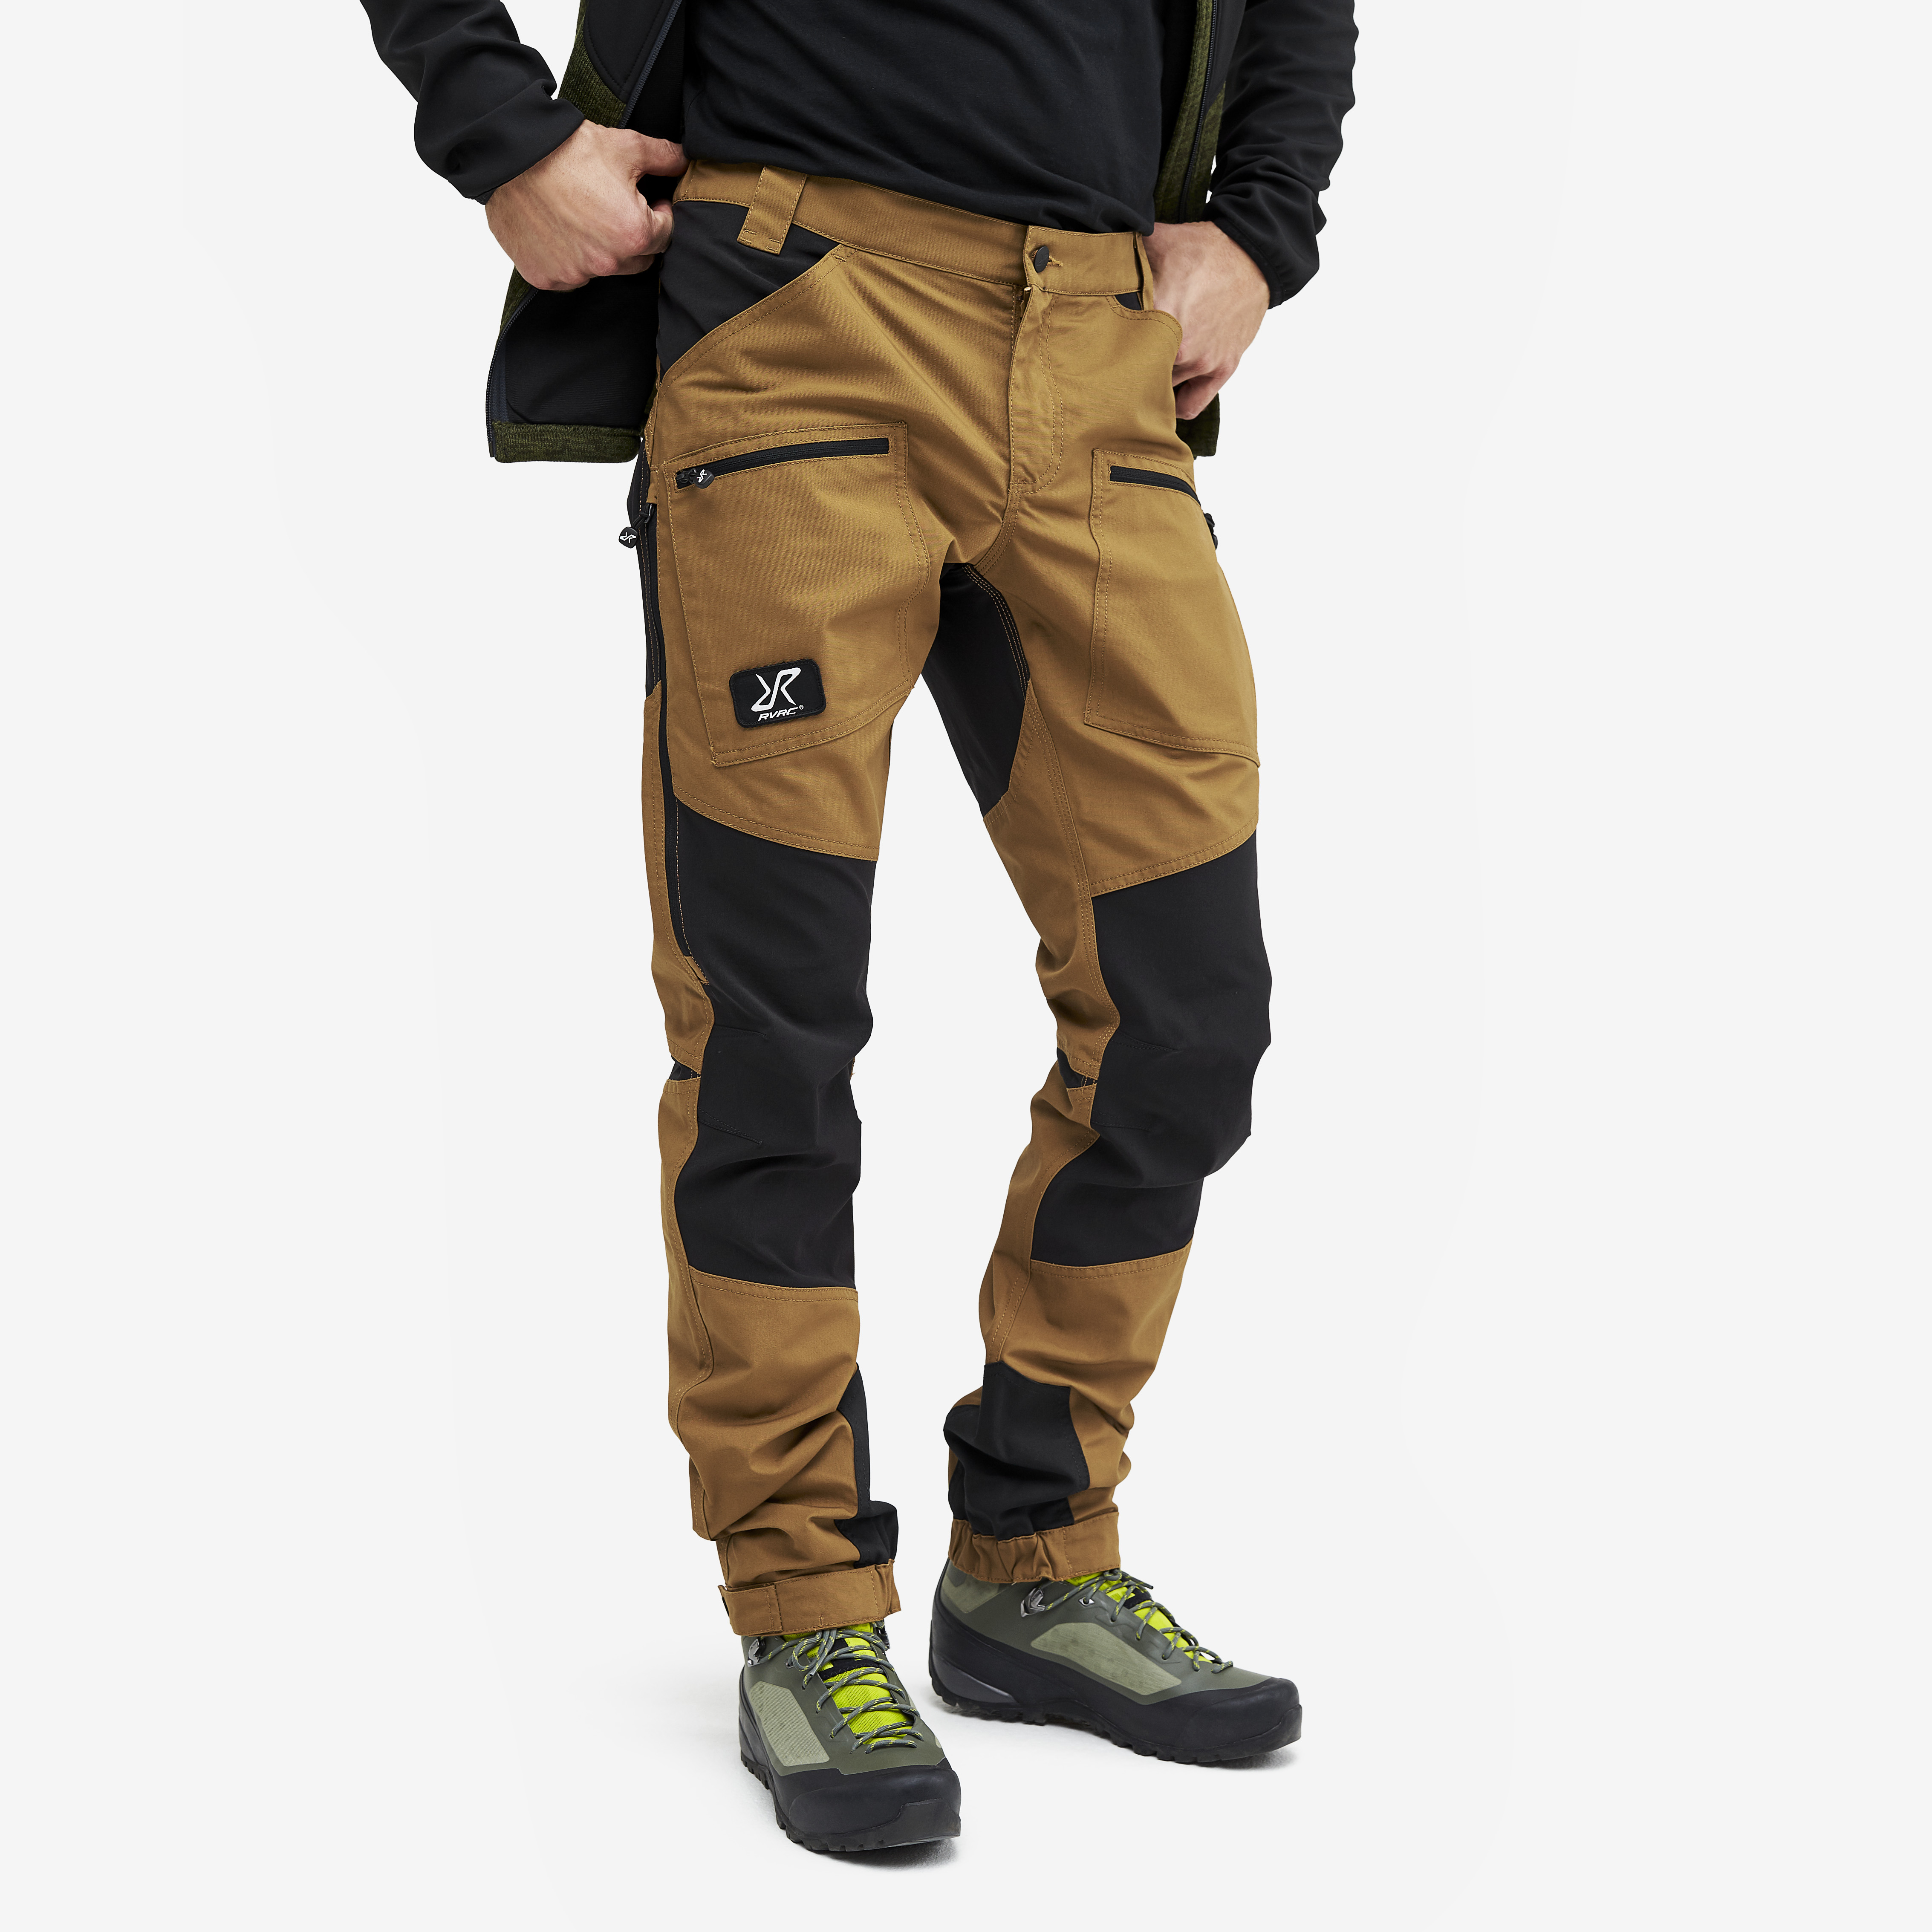 Nordwand Pro hiking trousers for men in yellow